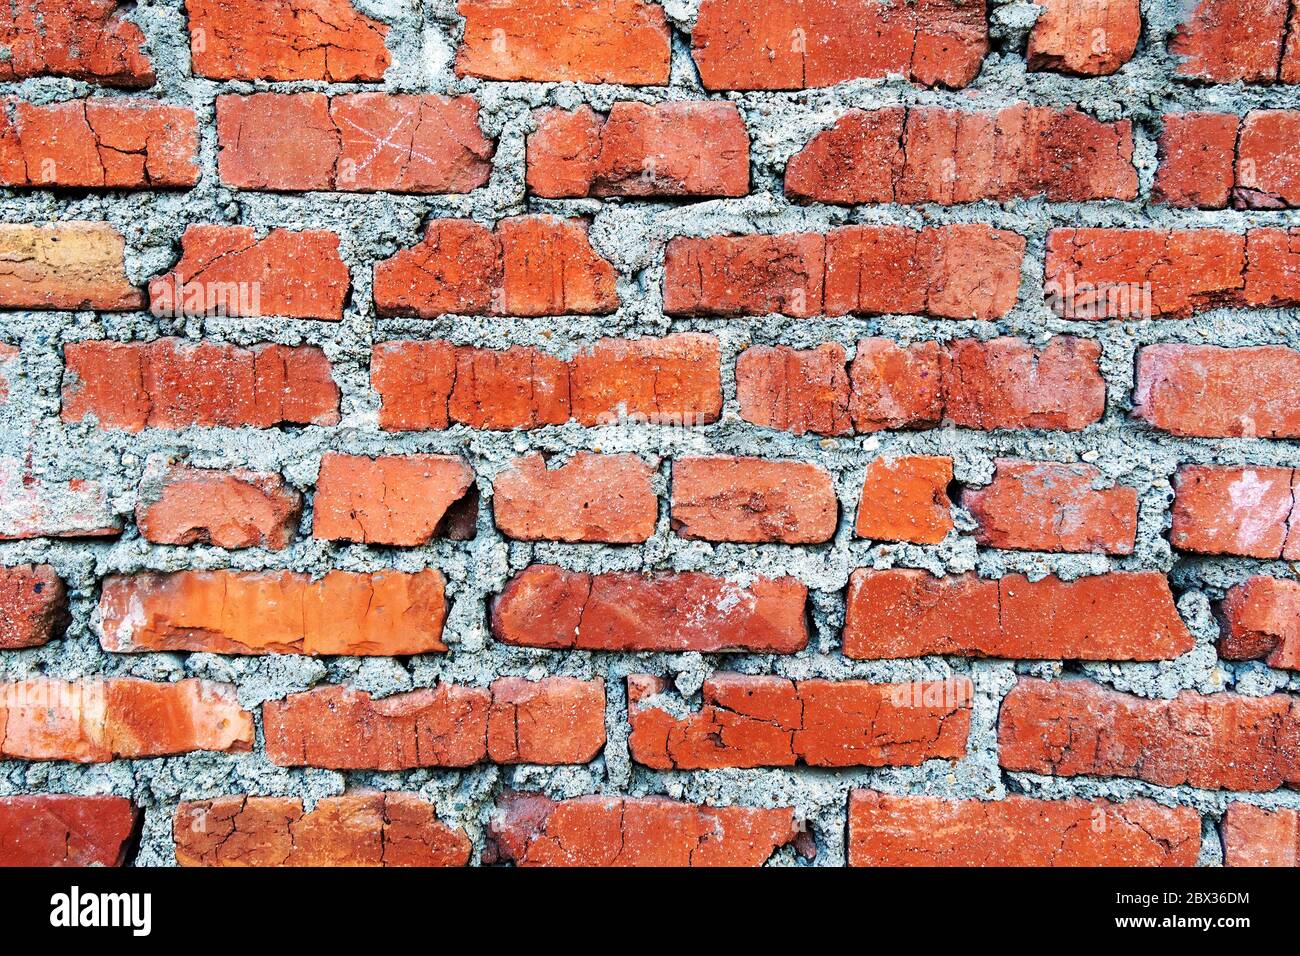 Brown brick wall. Empty horizontal background with old bricks and mortar. Stock Photo